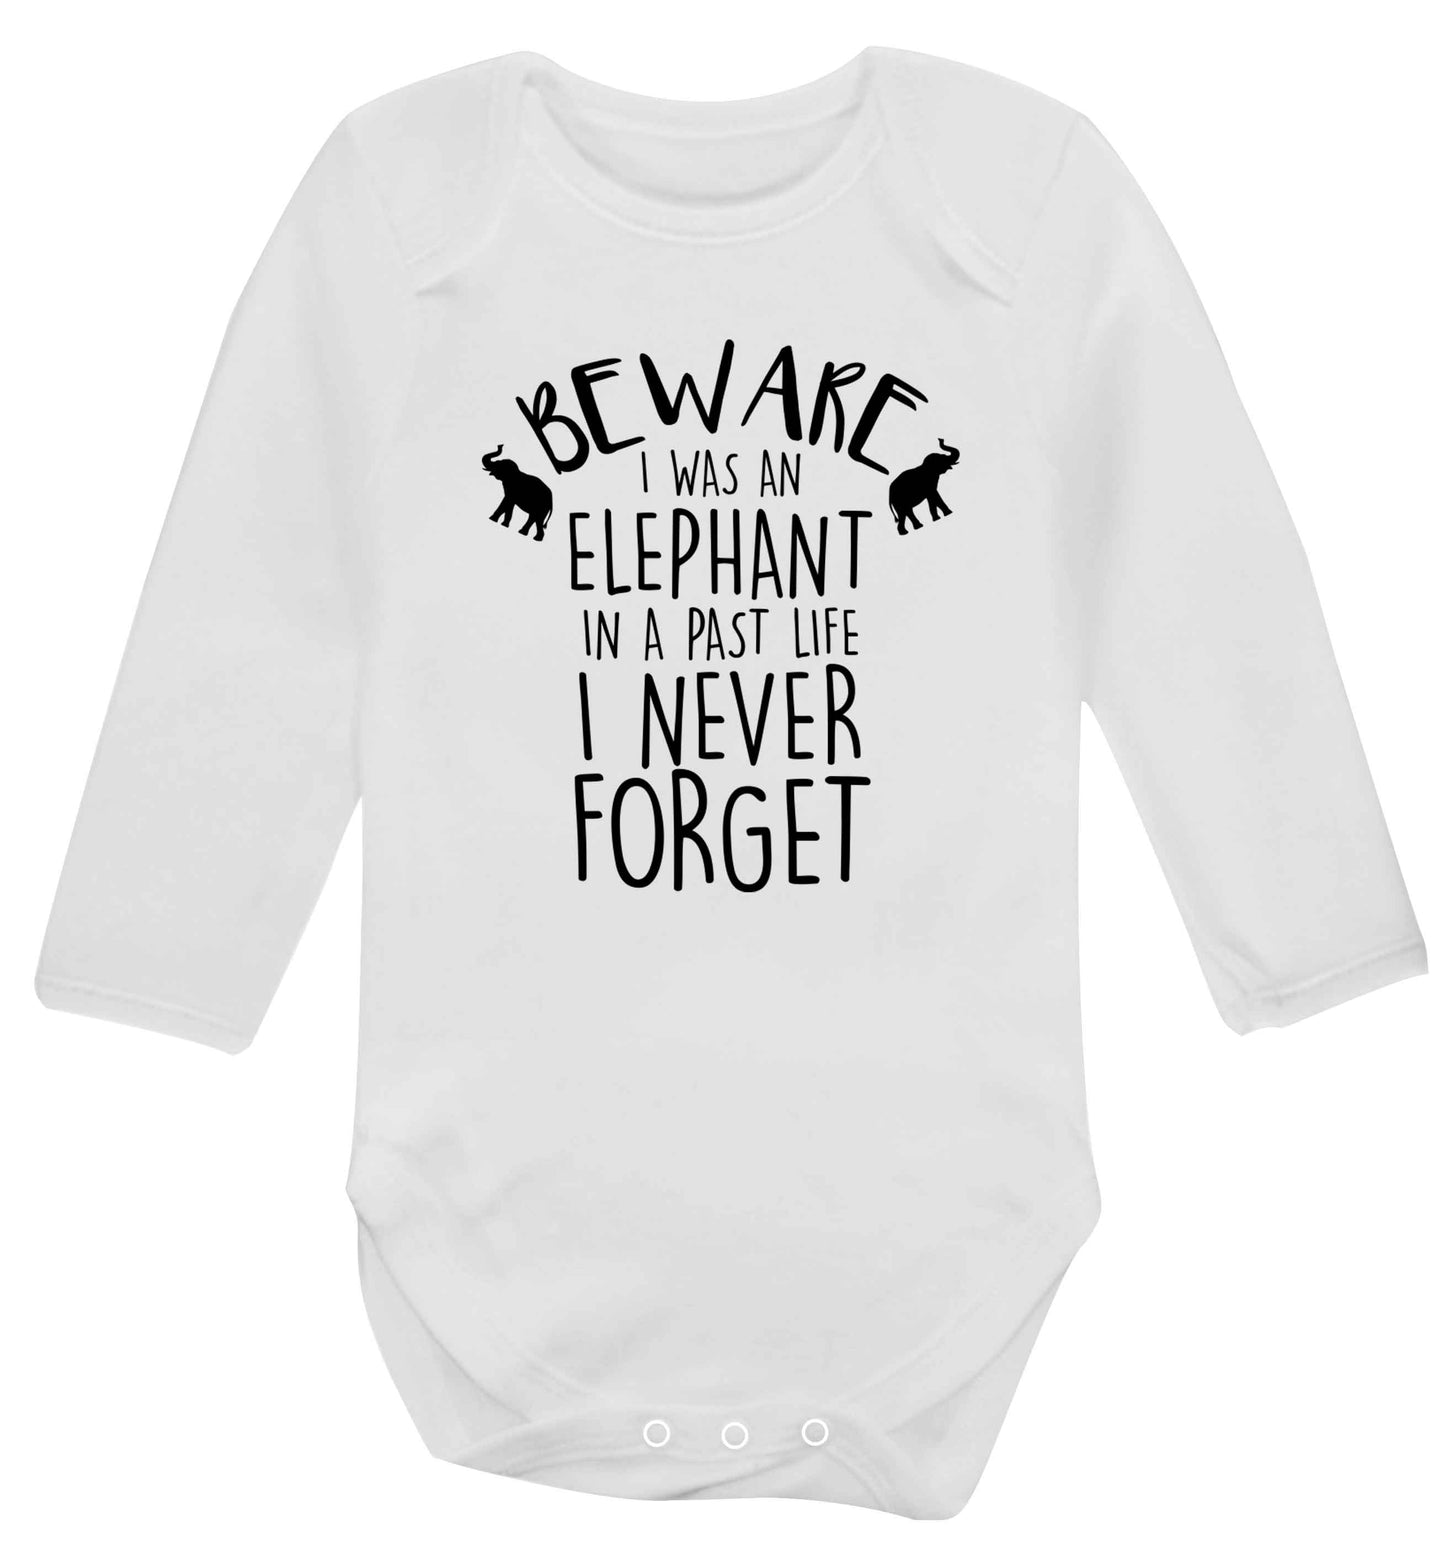 Beware I was an elephant in my past life I never forget Baby Vest long sleeved white 6-12 months